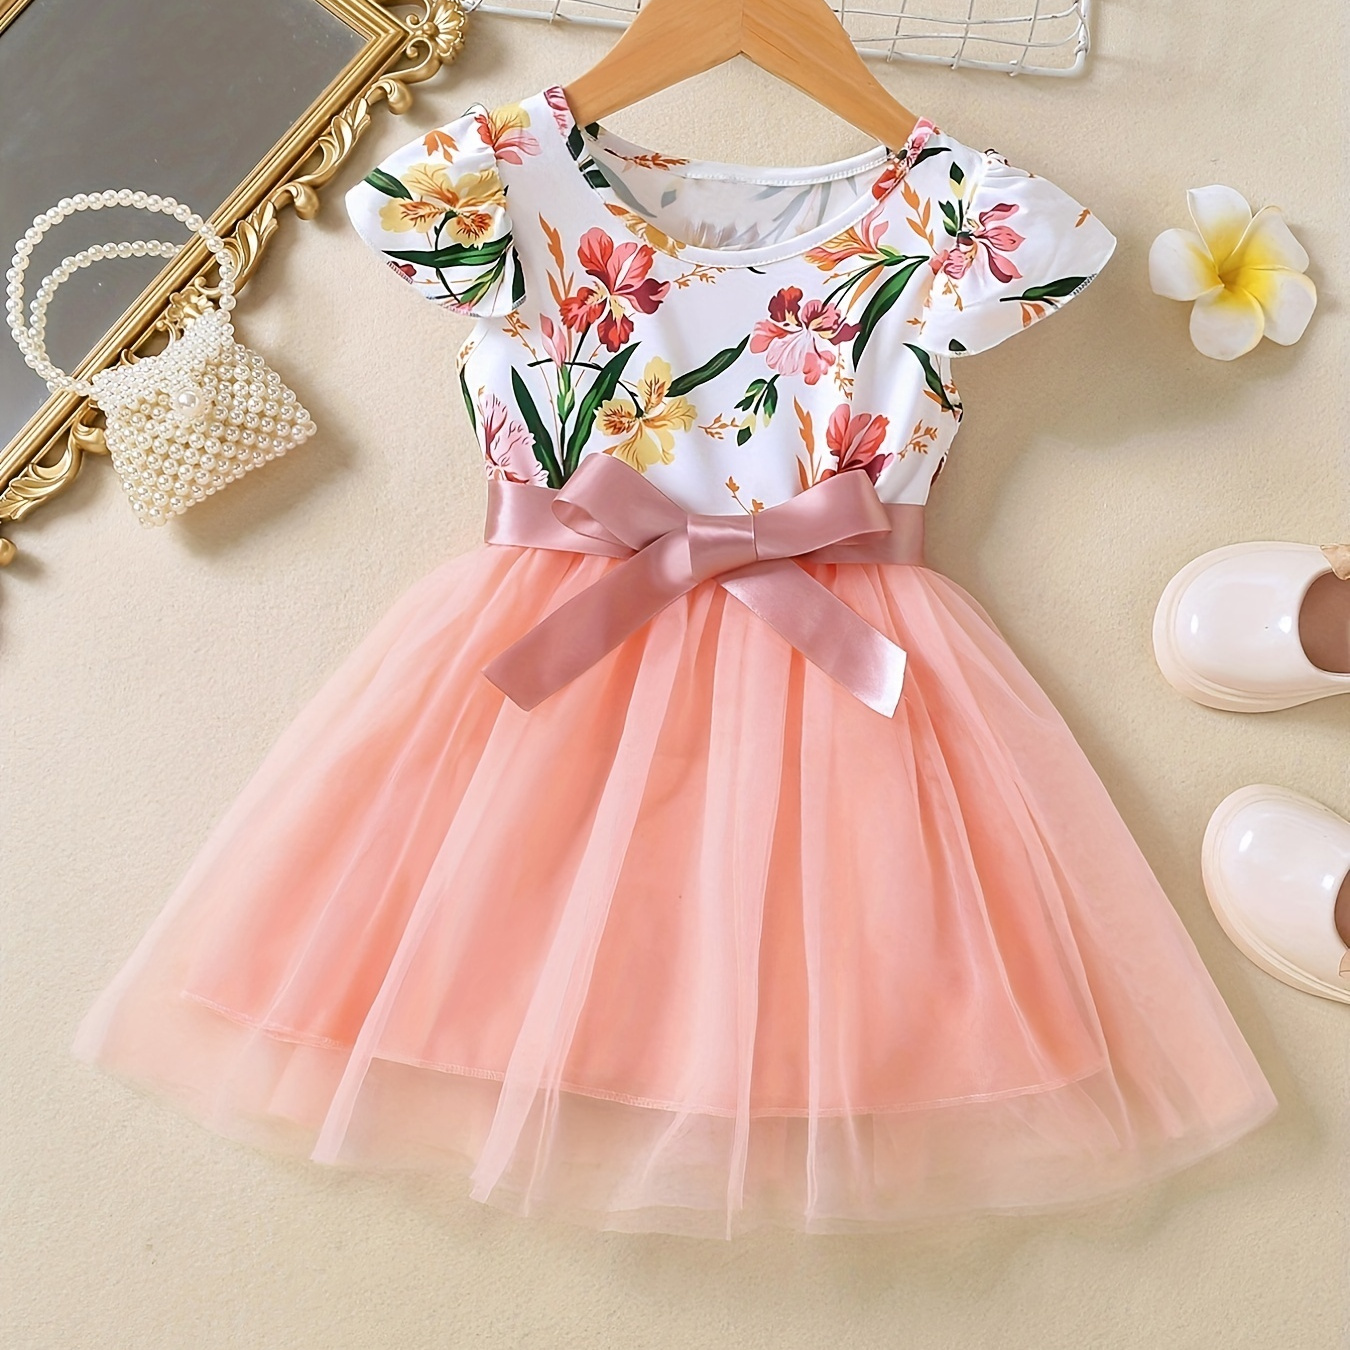 

Girls Ruffled Sleeves Crew Neck Bow Floral Tulle Tutu Splicing Princess Dress Kids Summer Clothes